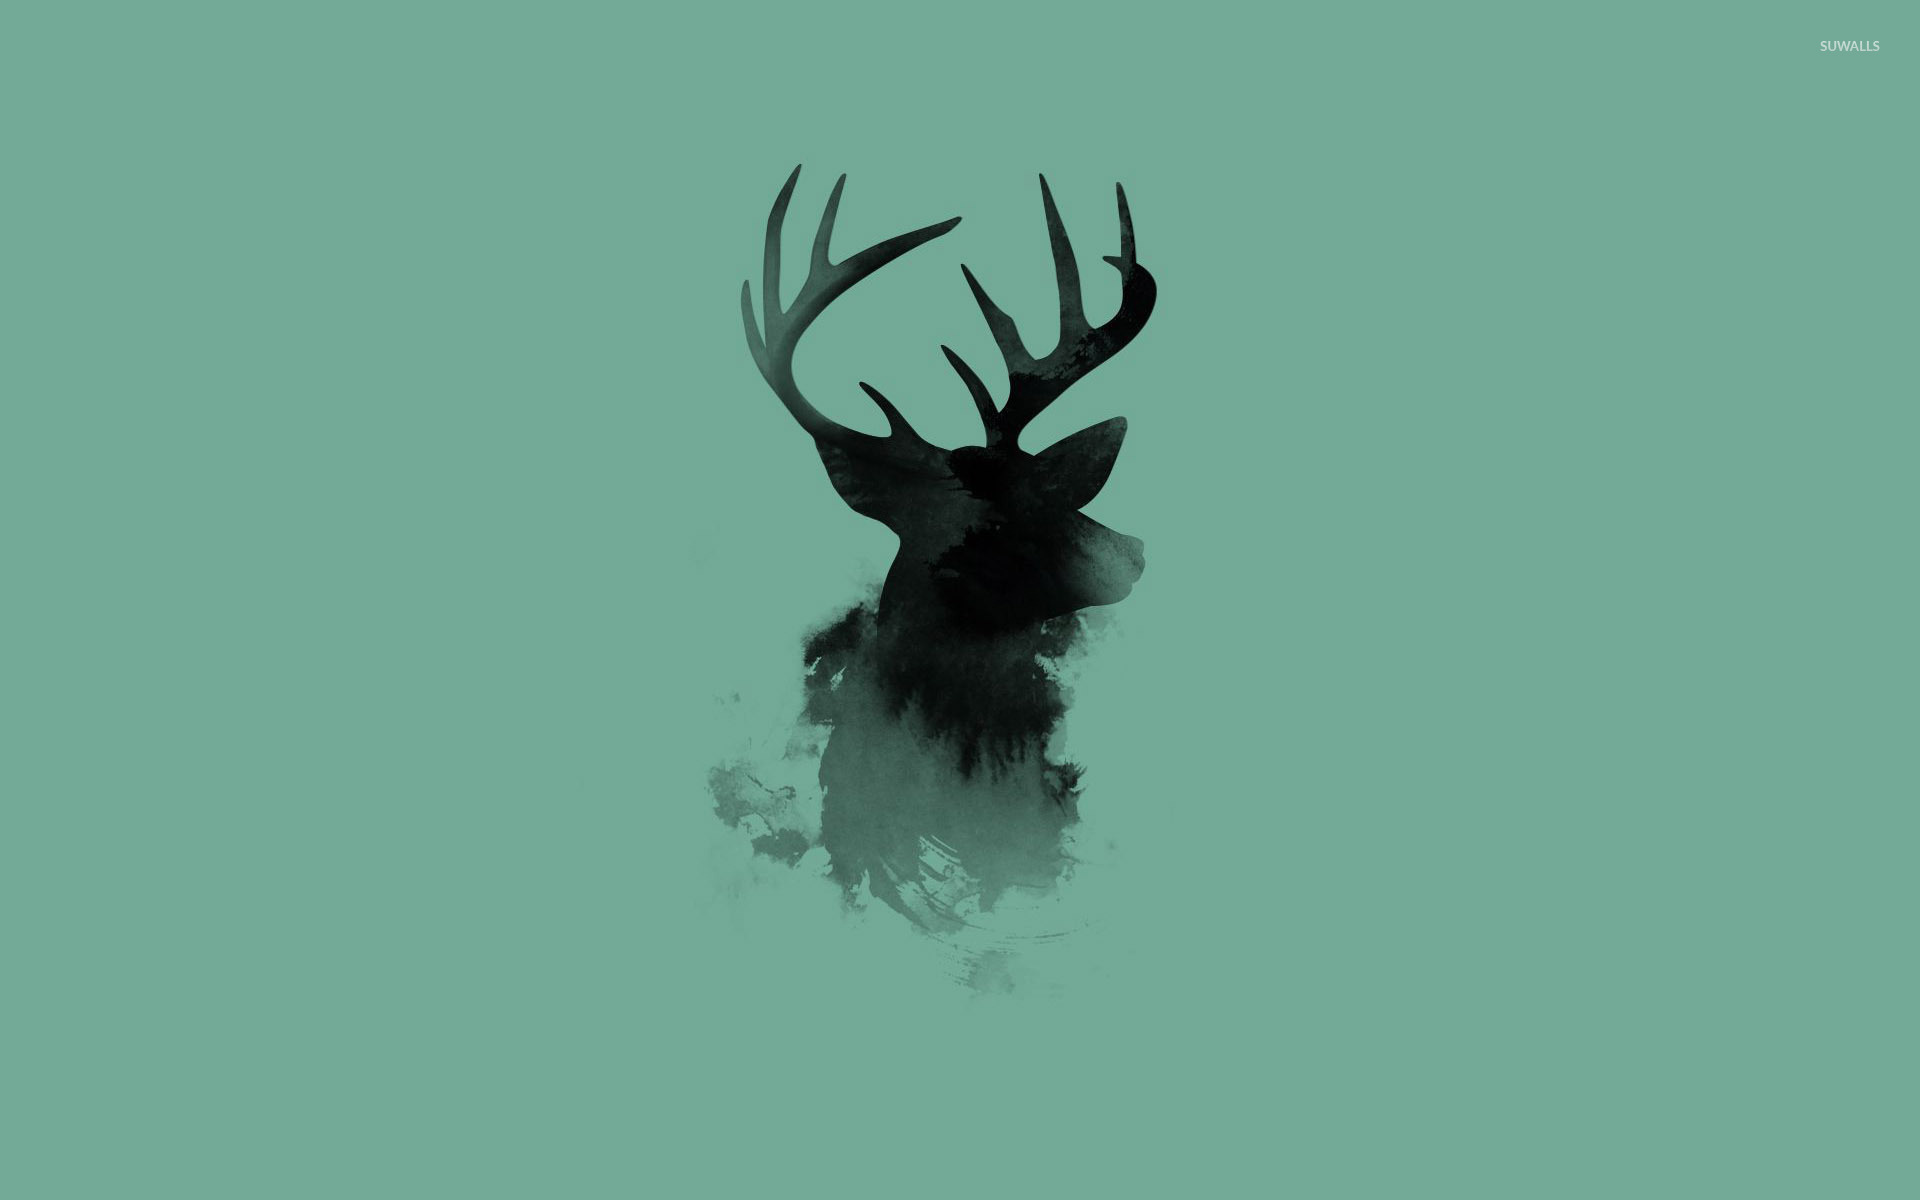 Stag Head Silhouette Wallpaper Artistic Wallpapers 26505 HD Wallpapers Download Free Map Images Wallpaper [wallpaper376.blogspot.com]